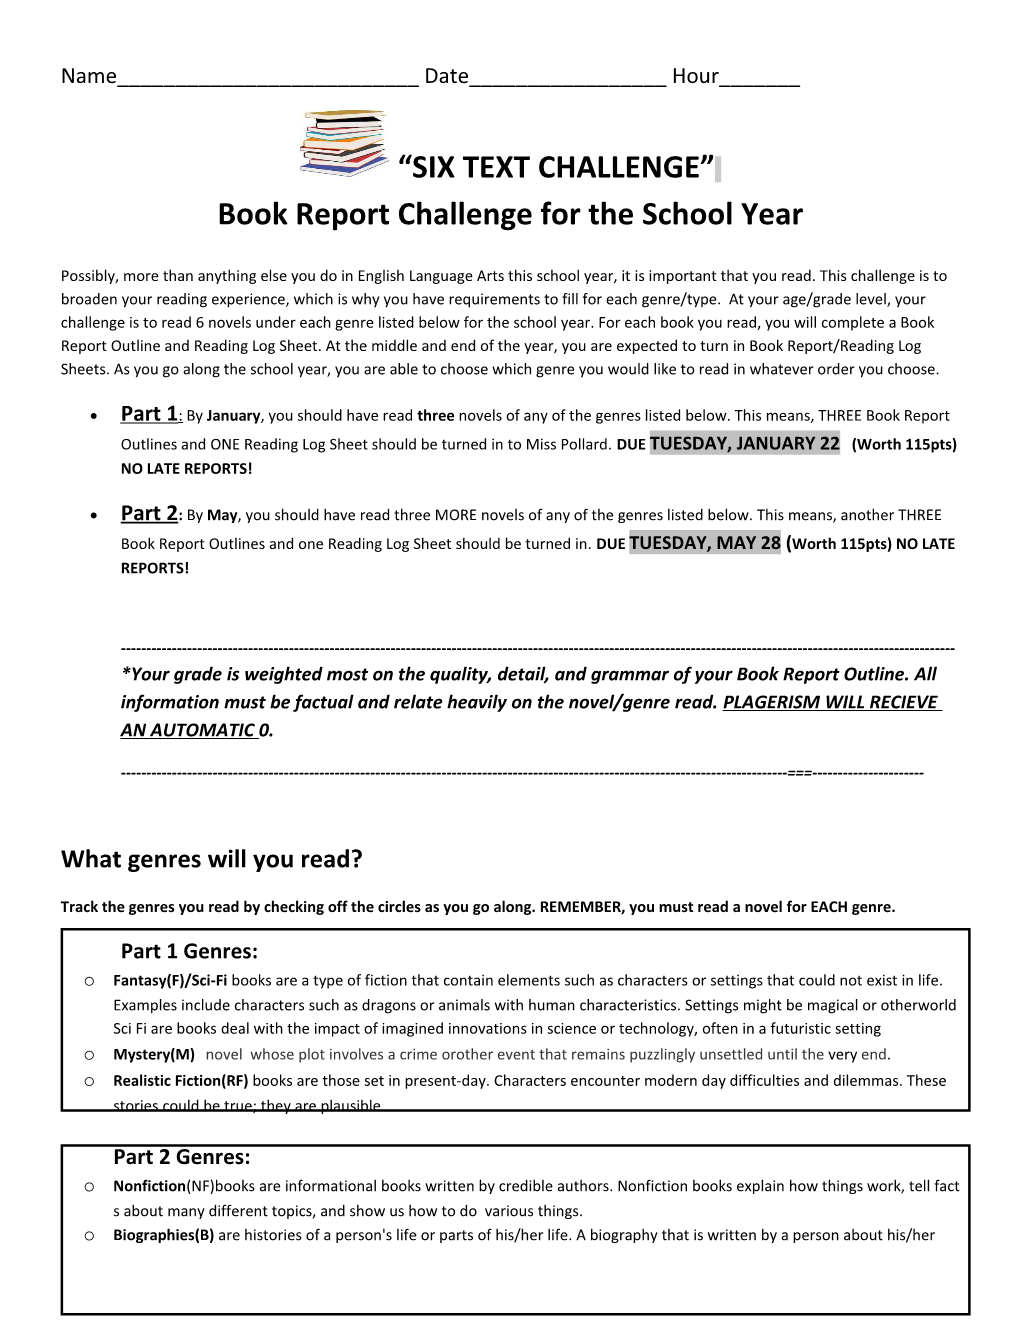 Book Report Challenge for the School Year